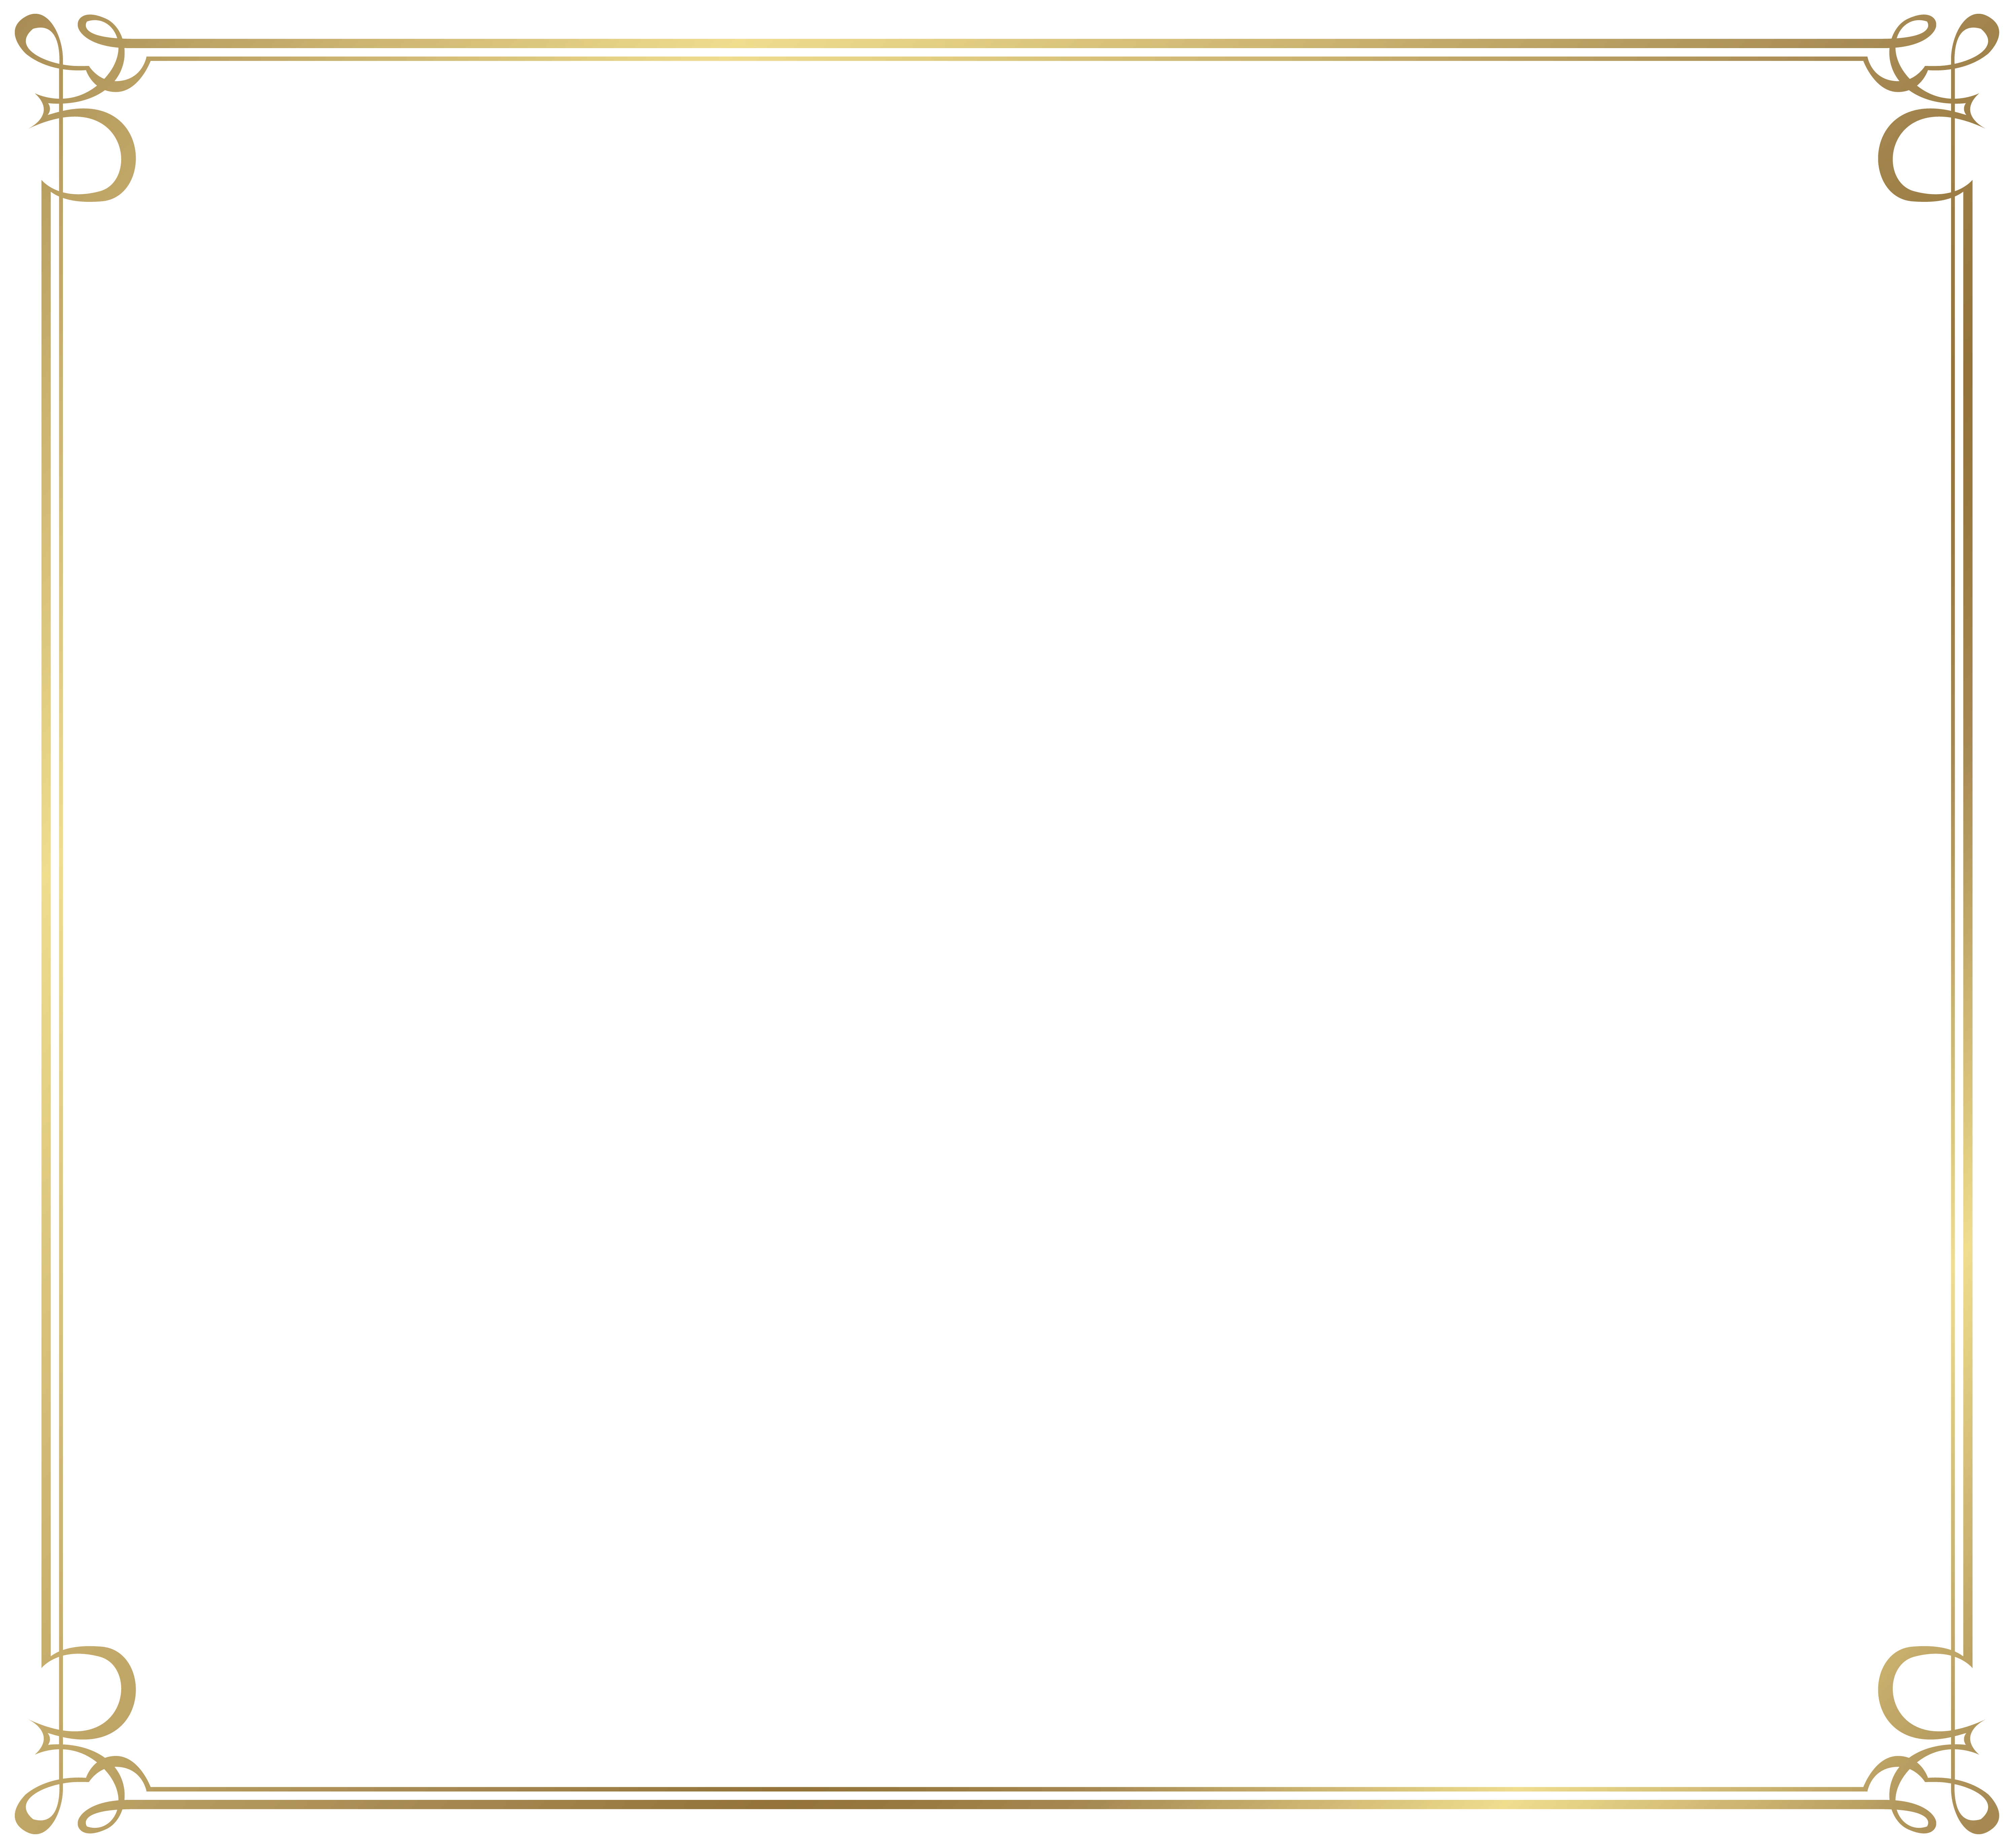 Images of spacehero frame. Decorative border png